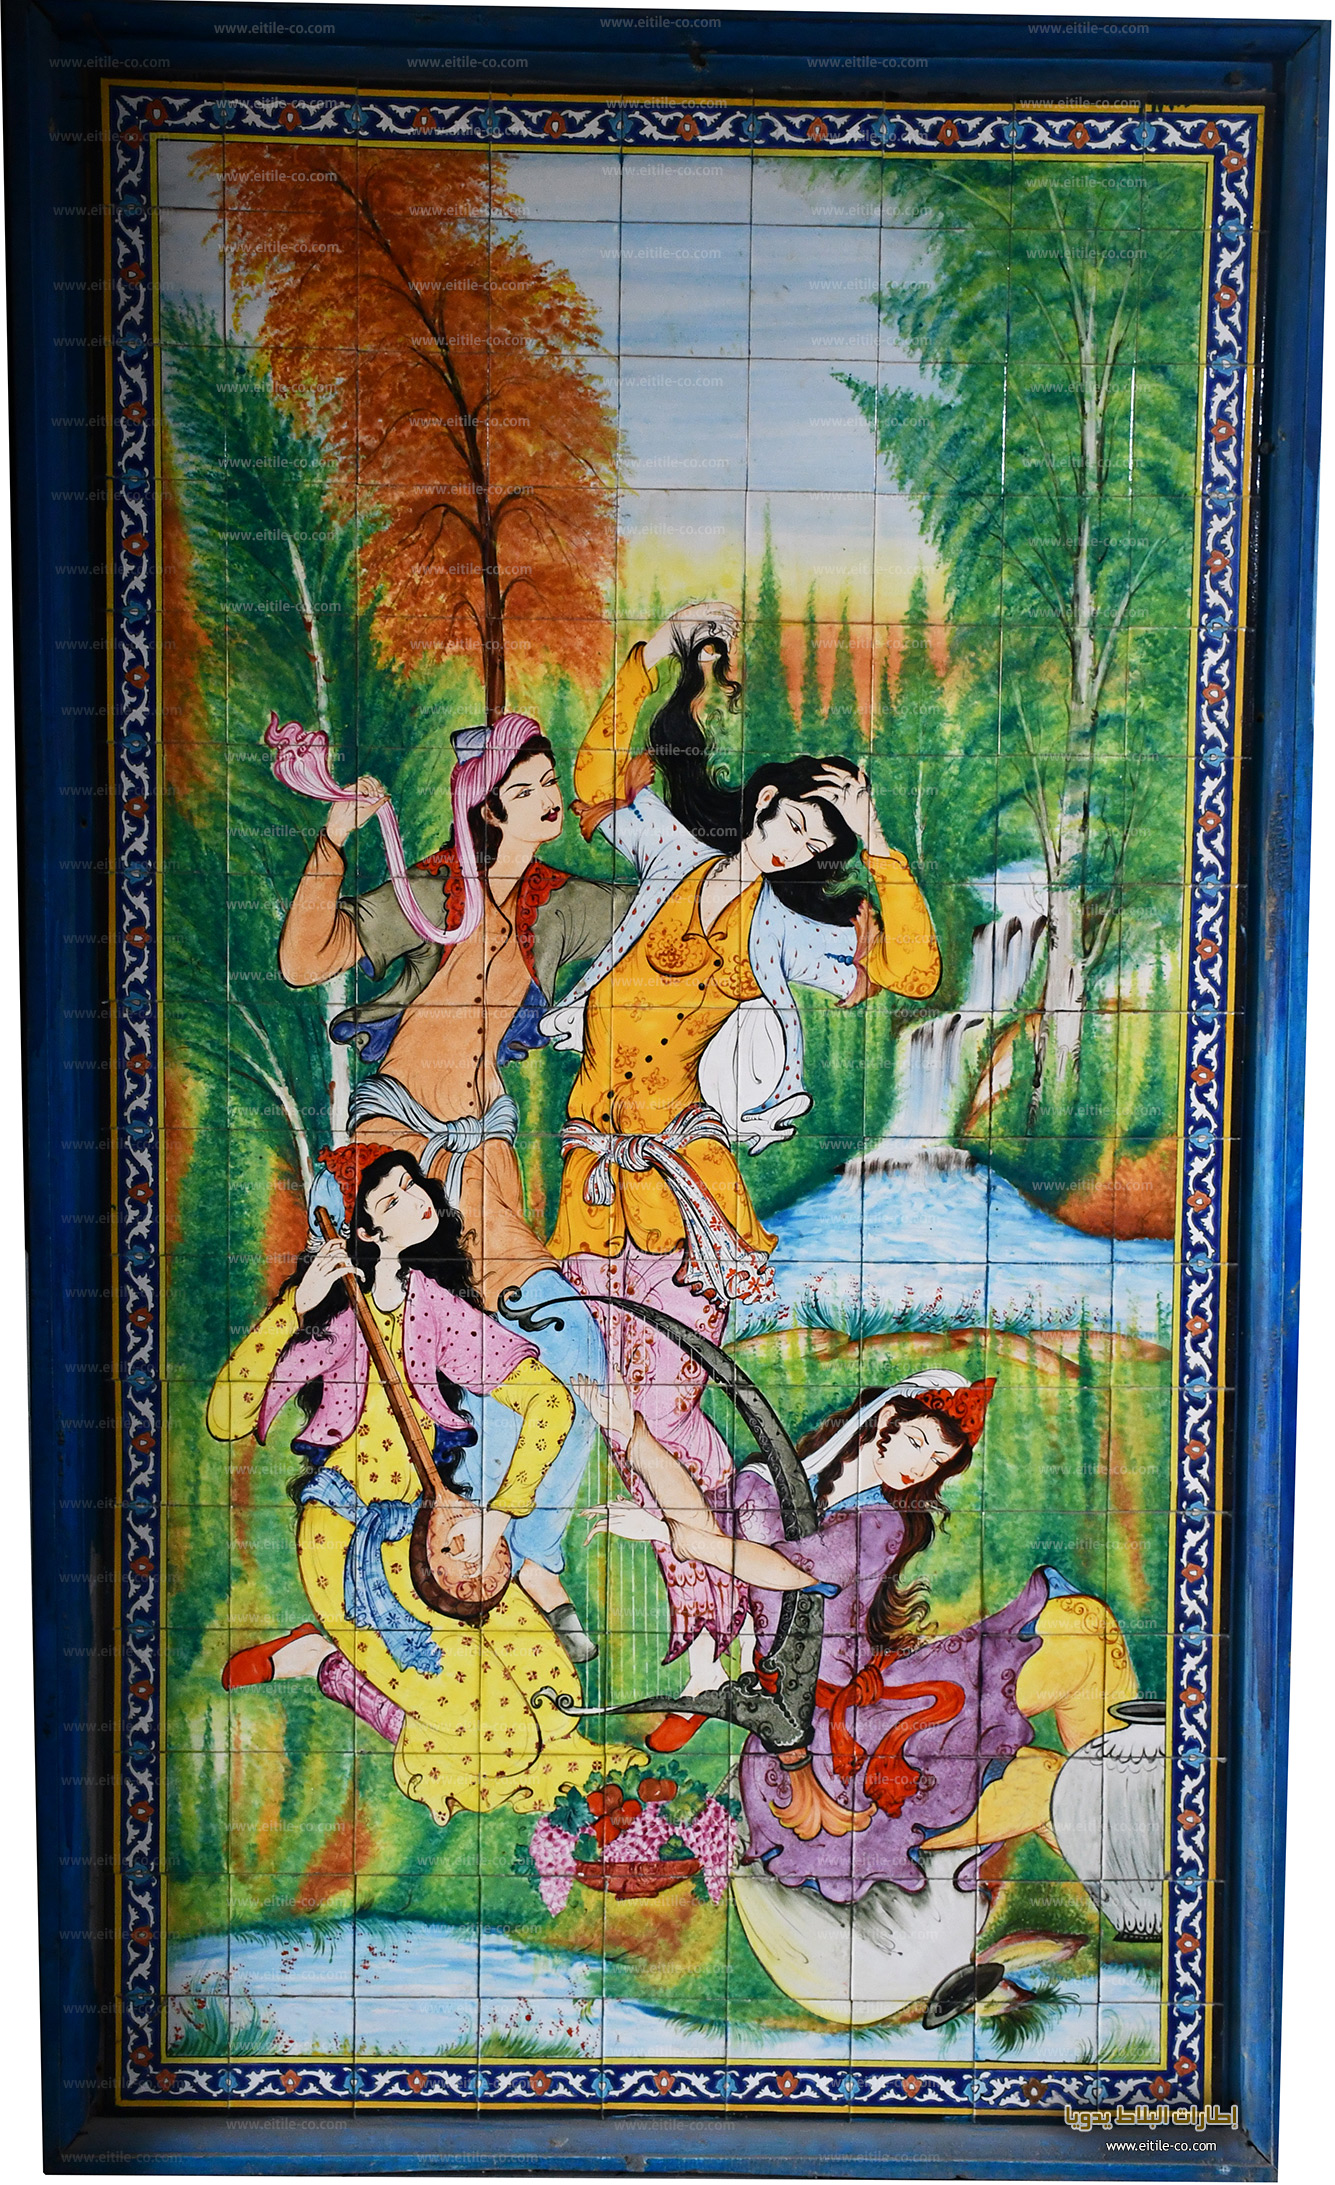 Wall frame made of Iranian tiles with miniature painting, www.eitile.com